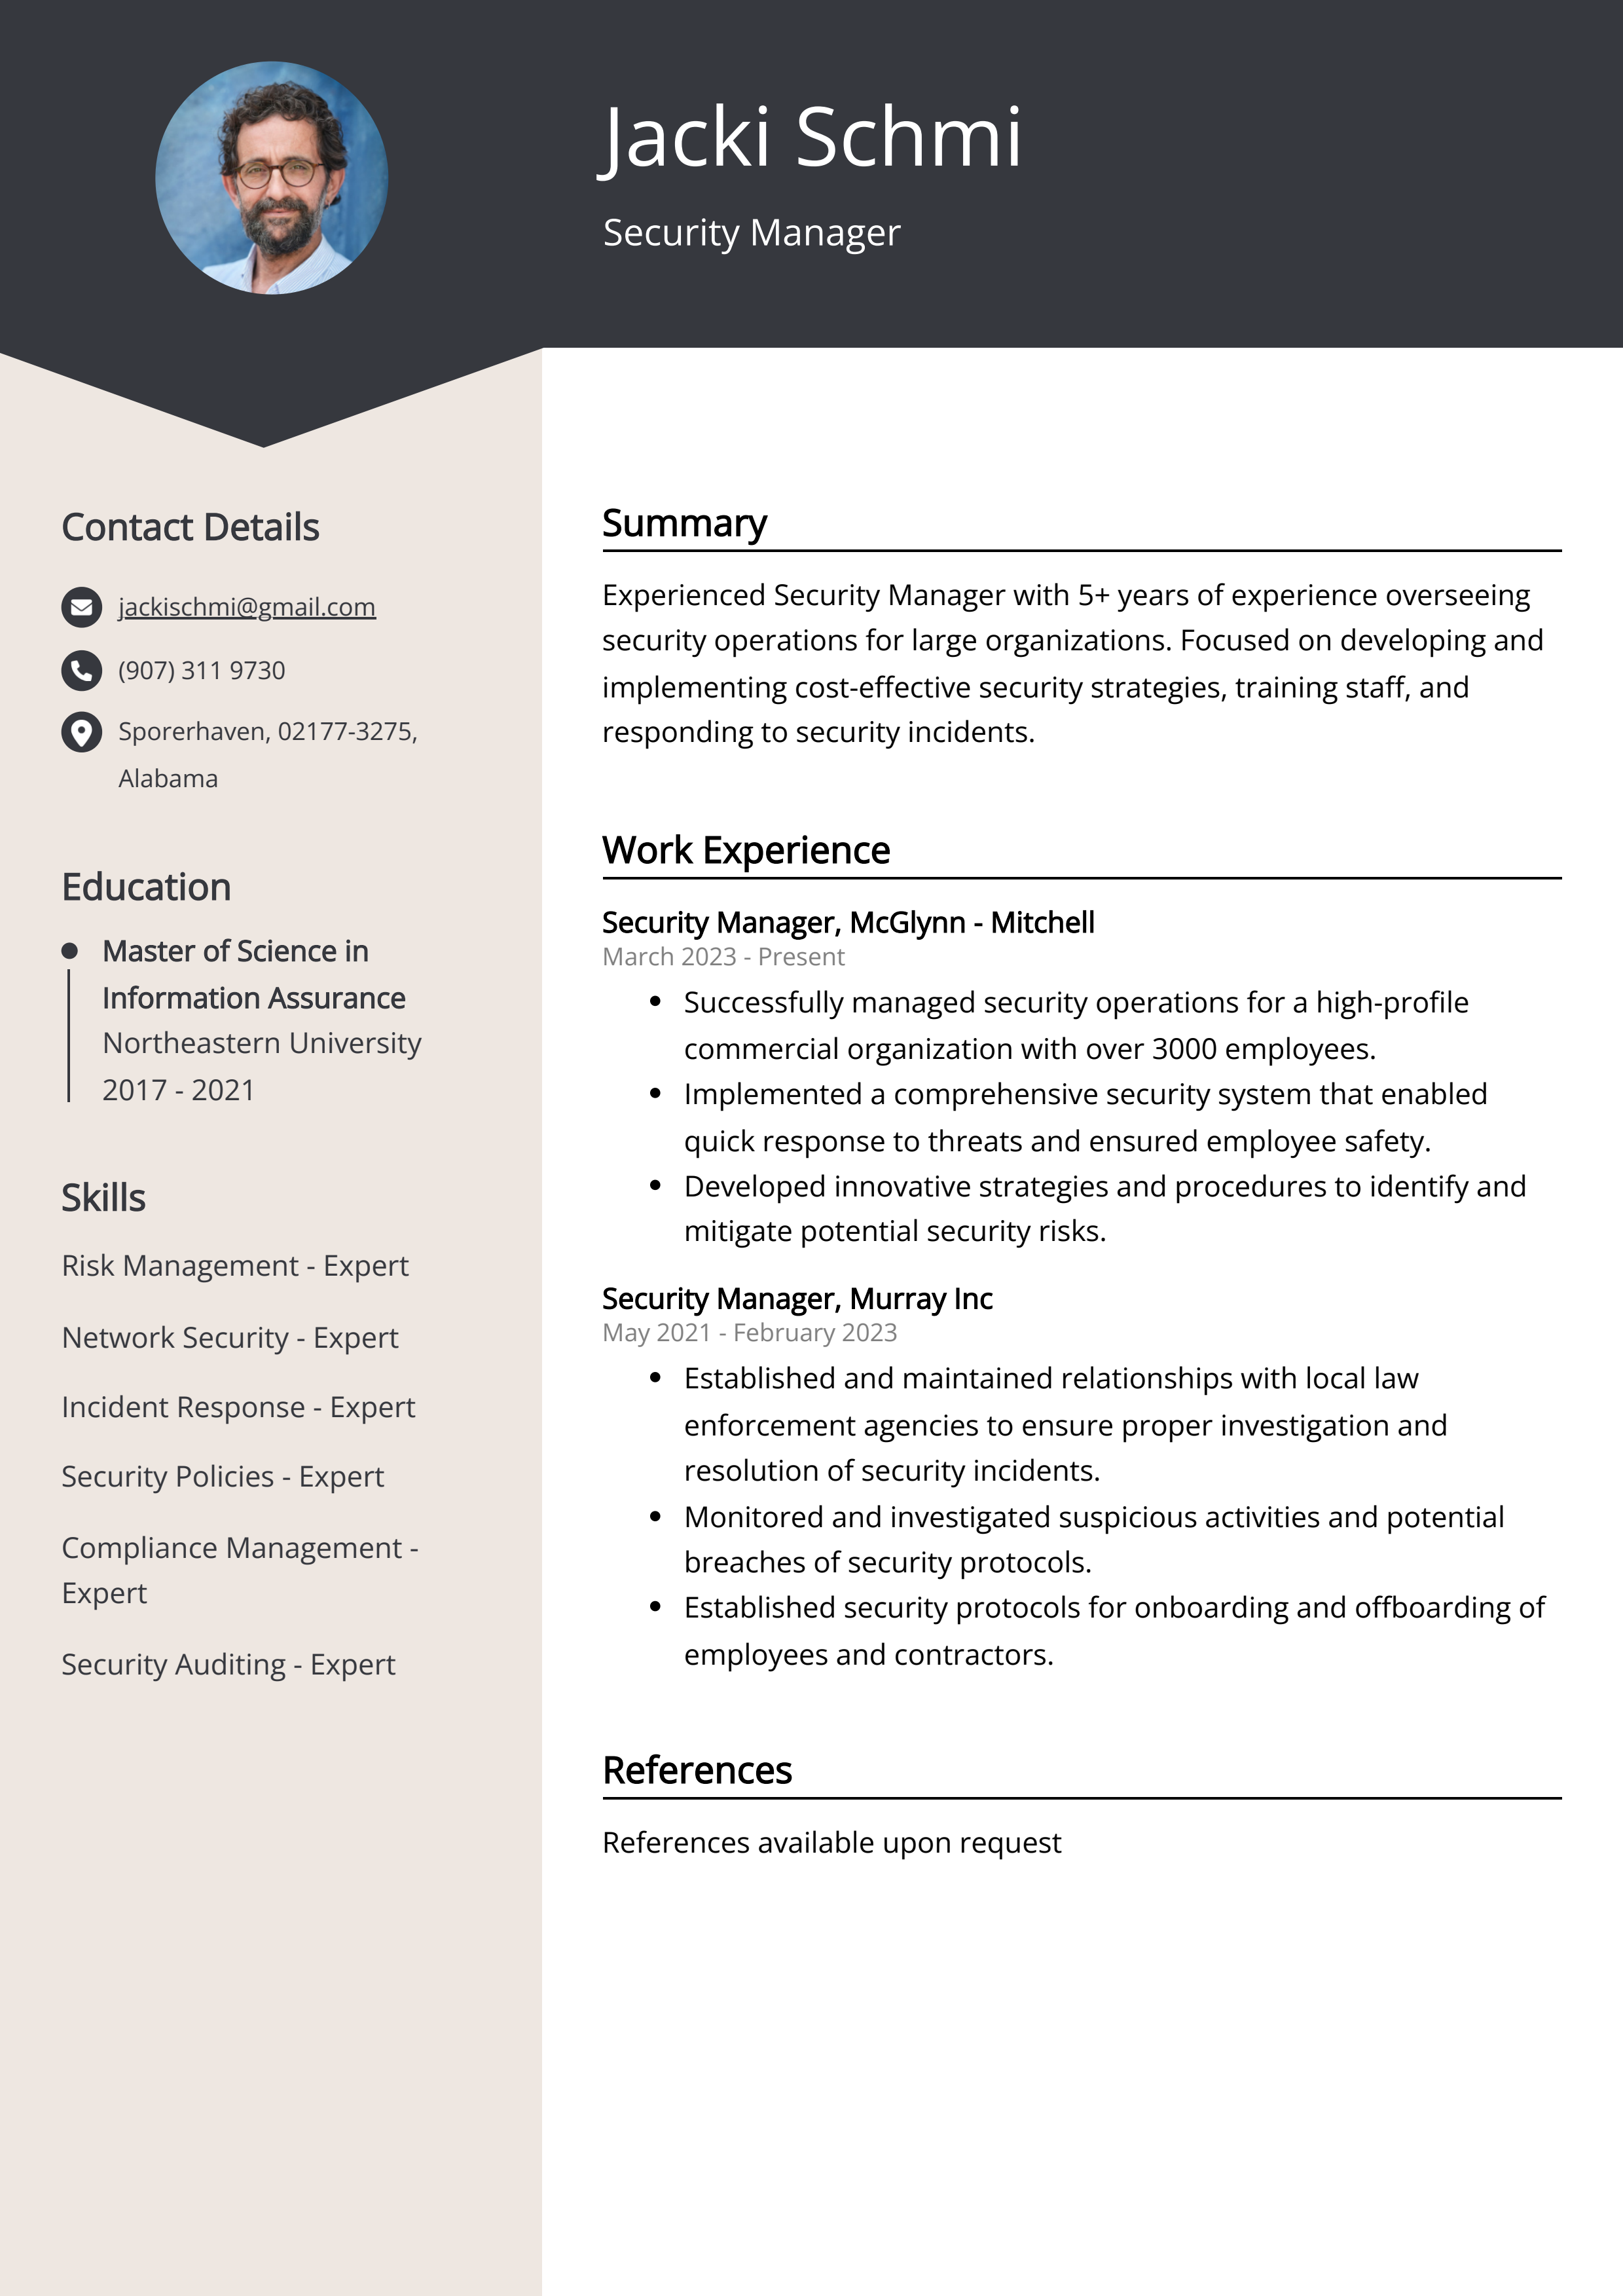 Security Manager CV Example